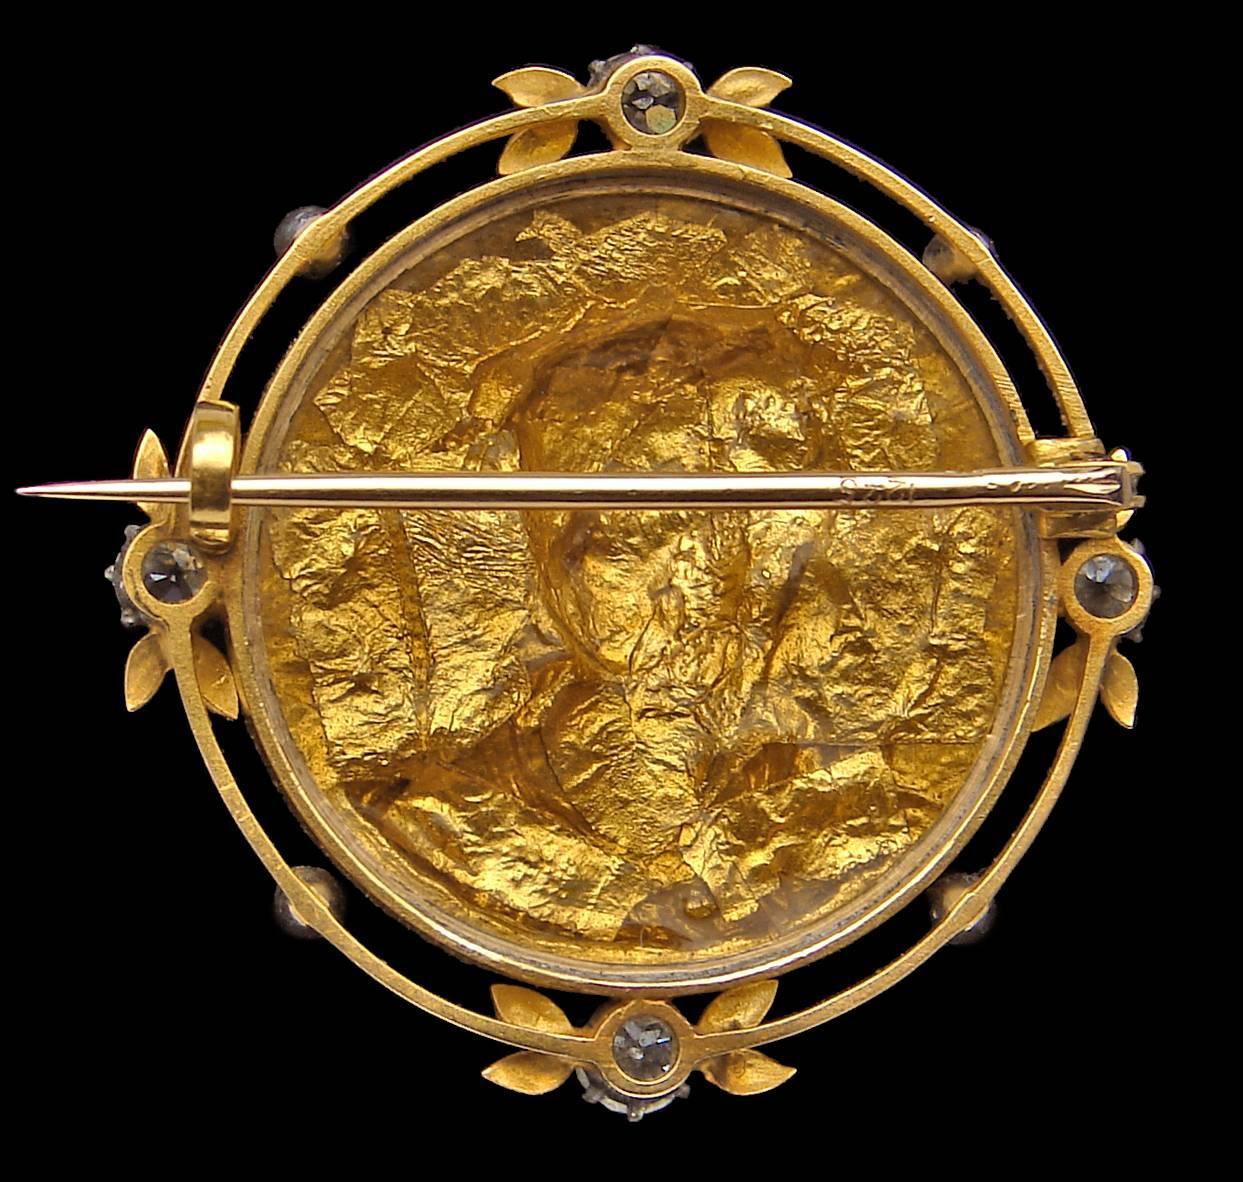 Renaissance Revival Brooch showing the influence of the Pre-Raphaelite Brotherhood. The freshness of this piece comes across extremely well showing a progression from the more usual Renaissance Revival forms to a lighter & more artistic jewel.